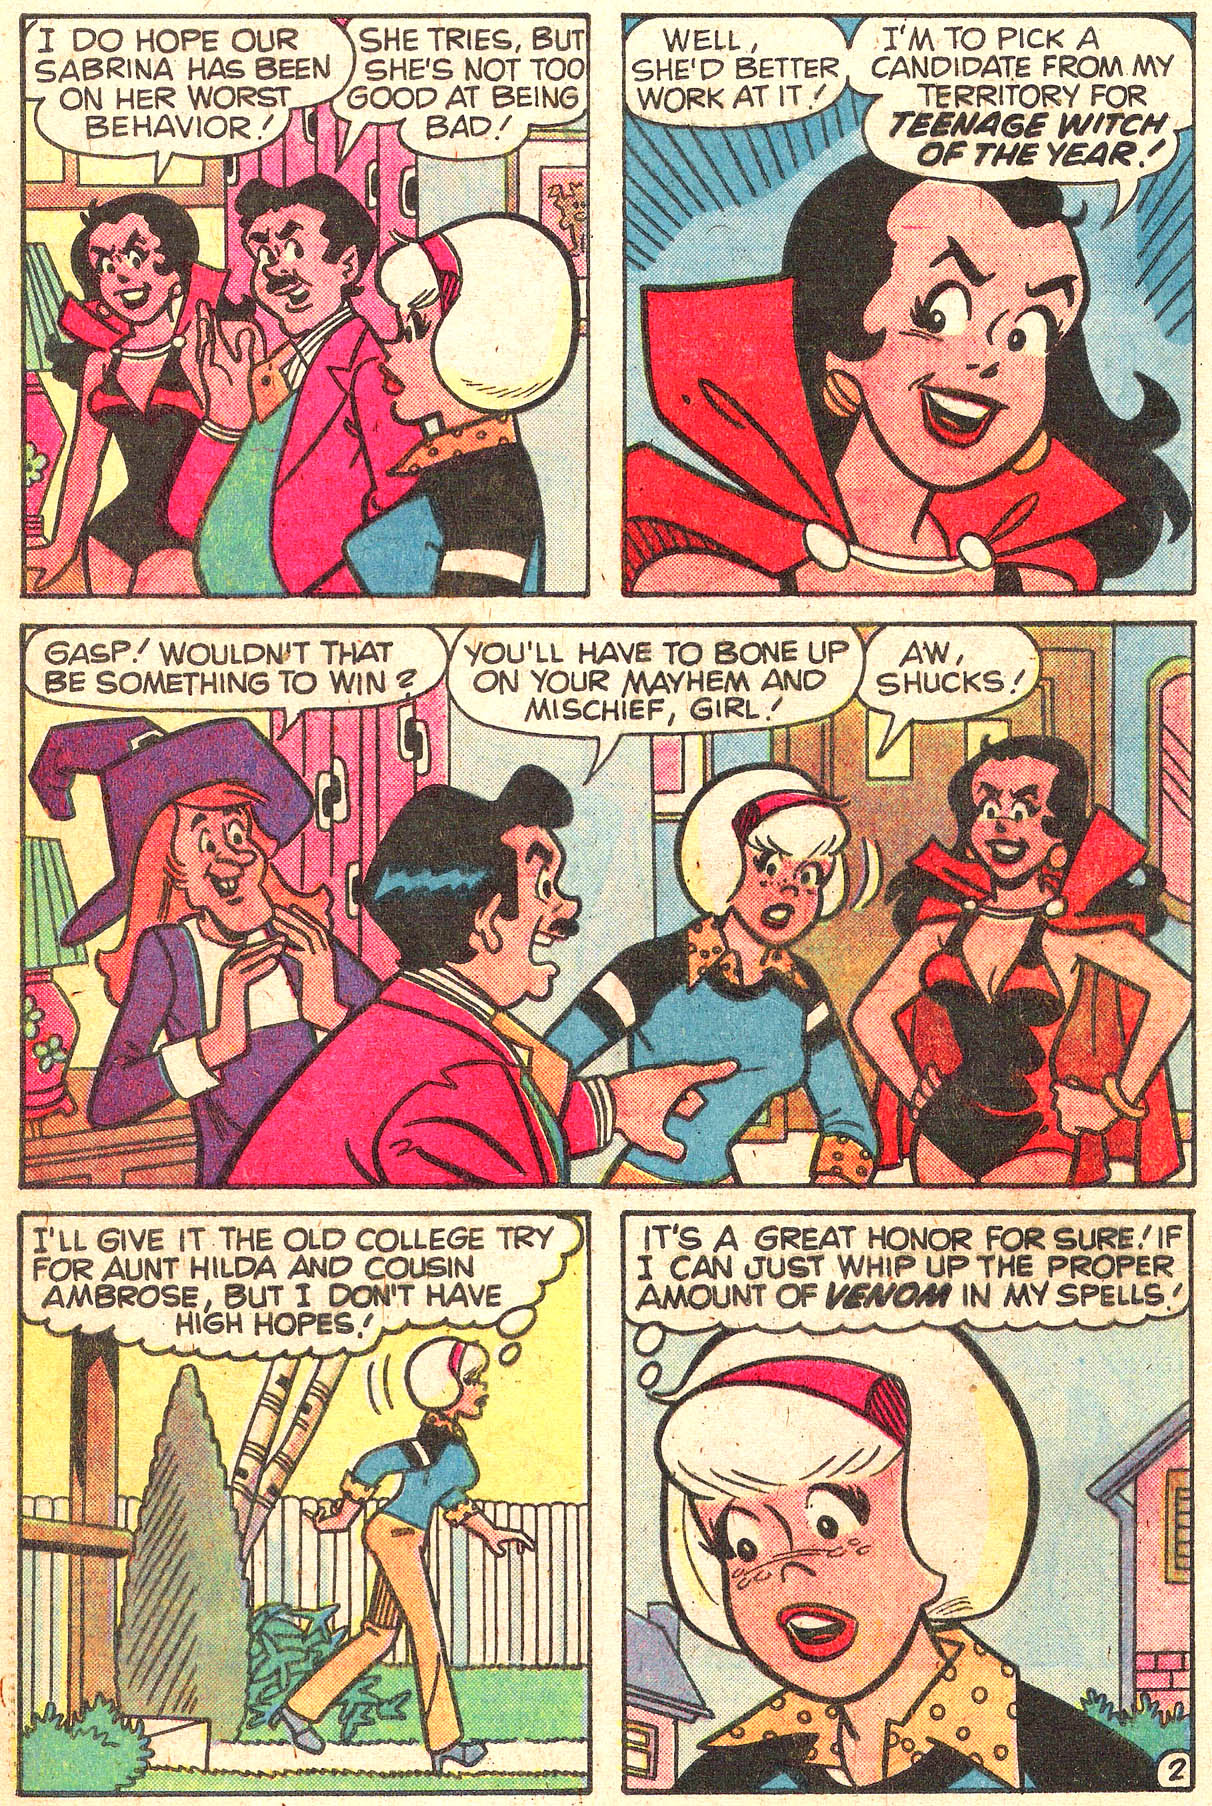 Sabrina The Teenage Witch (1971) Issue #57 #57 - English 4